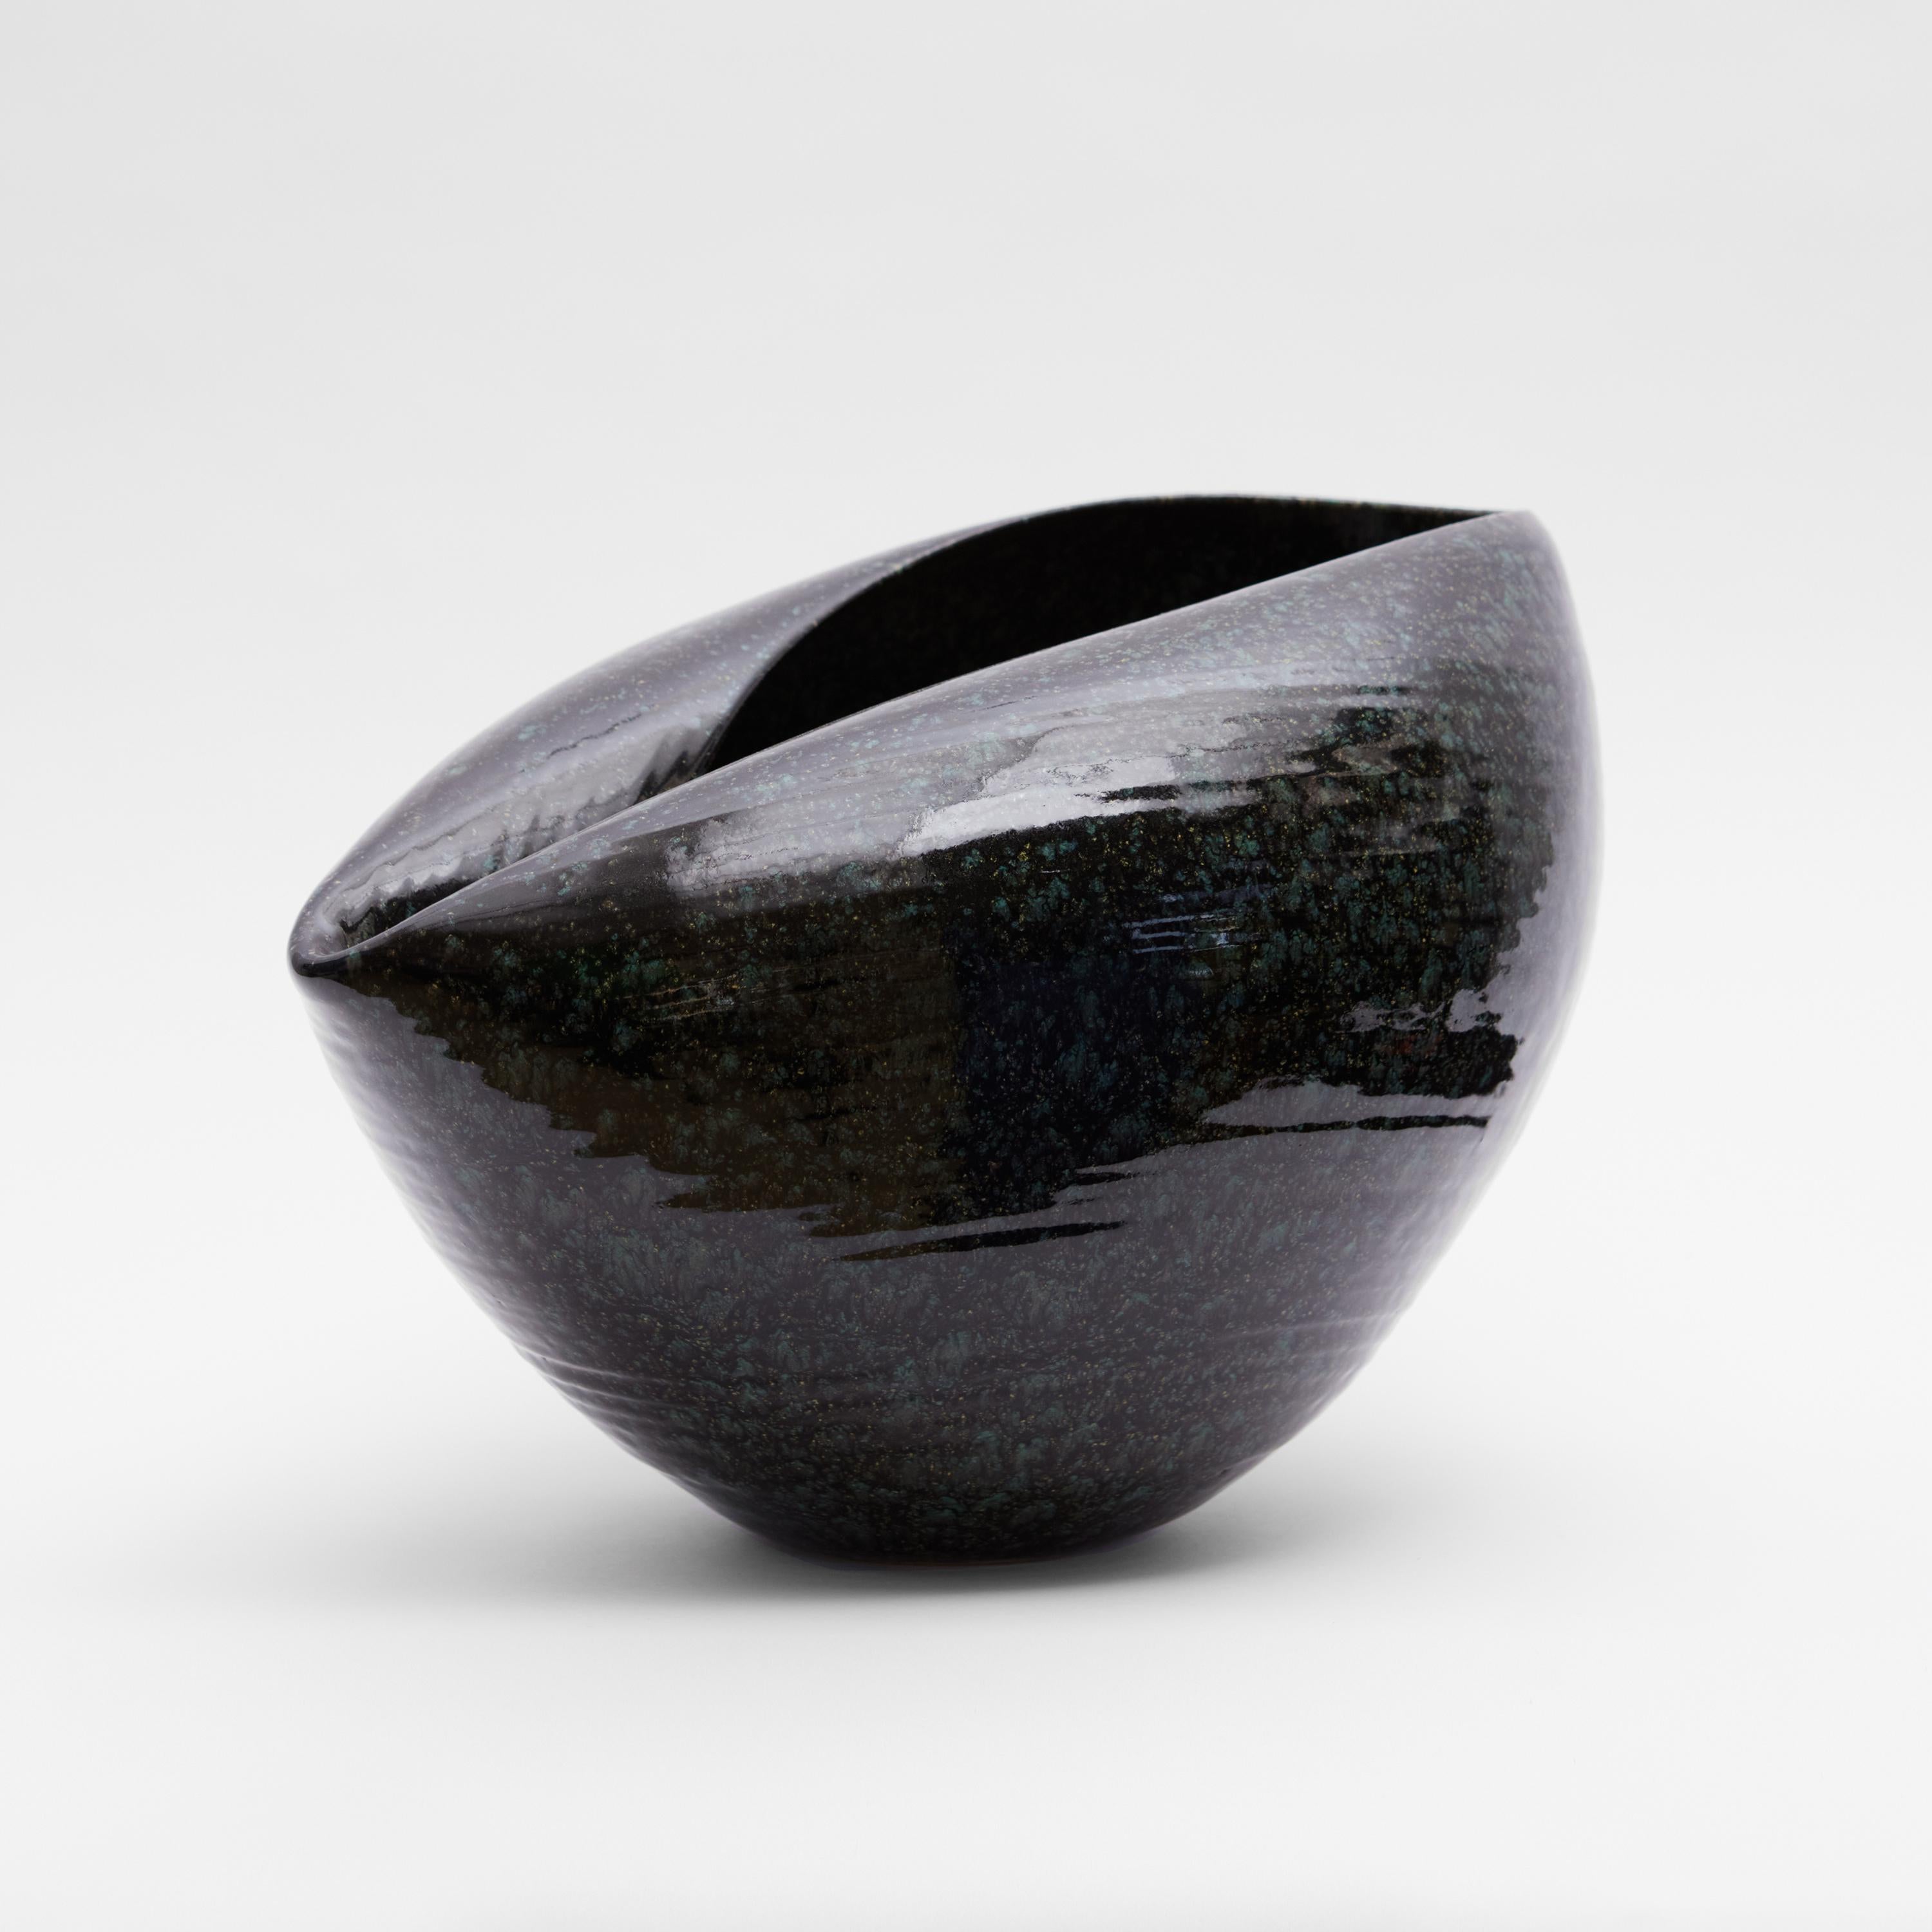 Vessel from ceramic artist Nicholas Arroyave-Portela.

No. 106 Large black cosmic open form (Vessel, Interior sculpture, not suitable for holding water)

White St.Thomas clay, Stoneware glazes, multi fired to cone 6 (1223 degrees)

Made in 2023
26